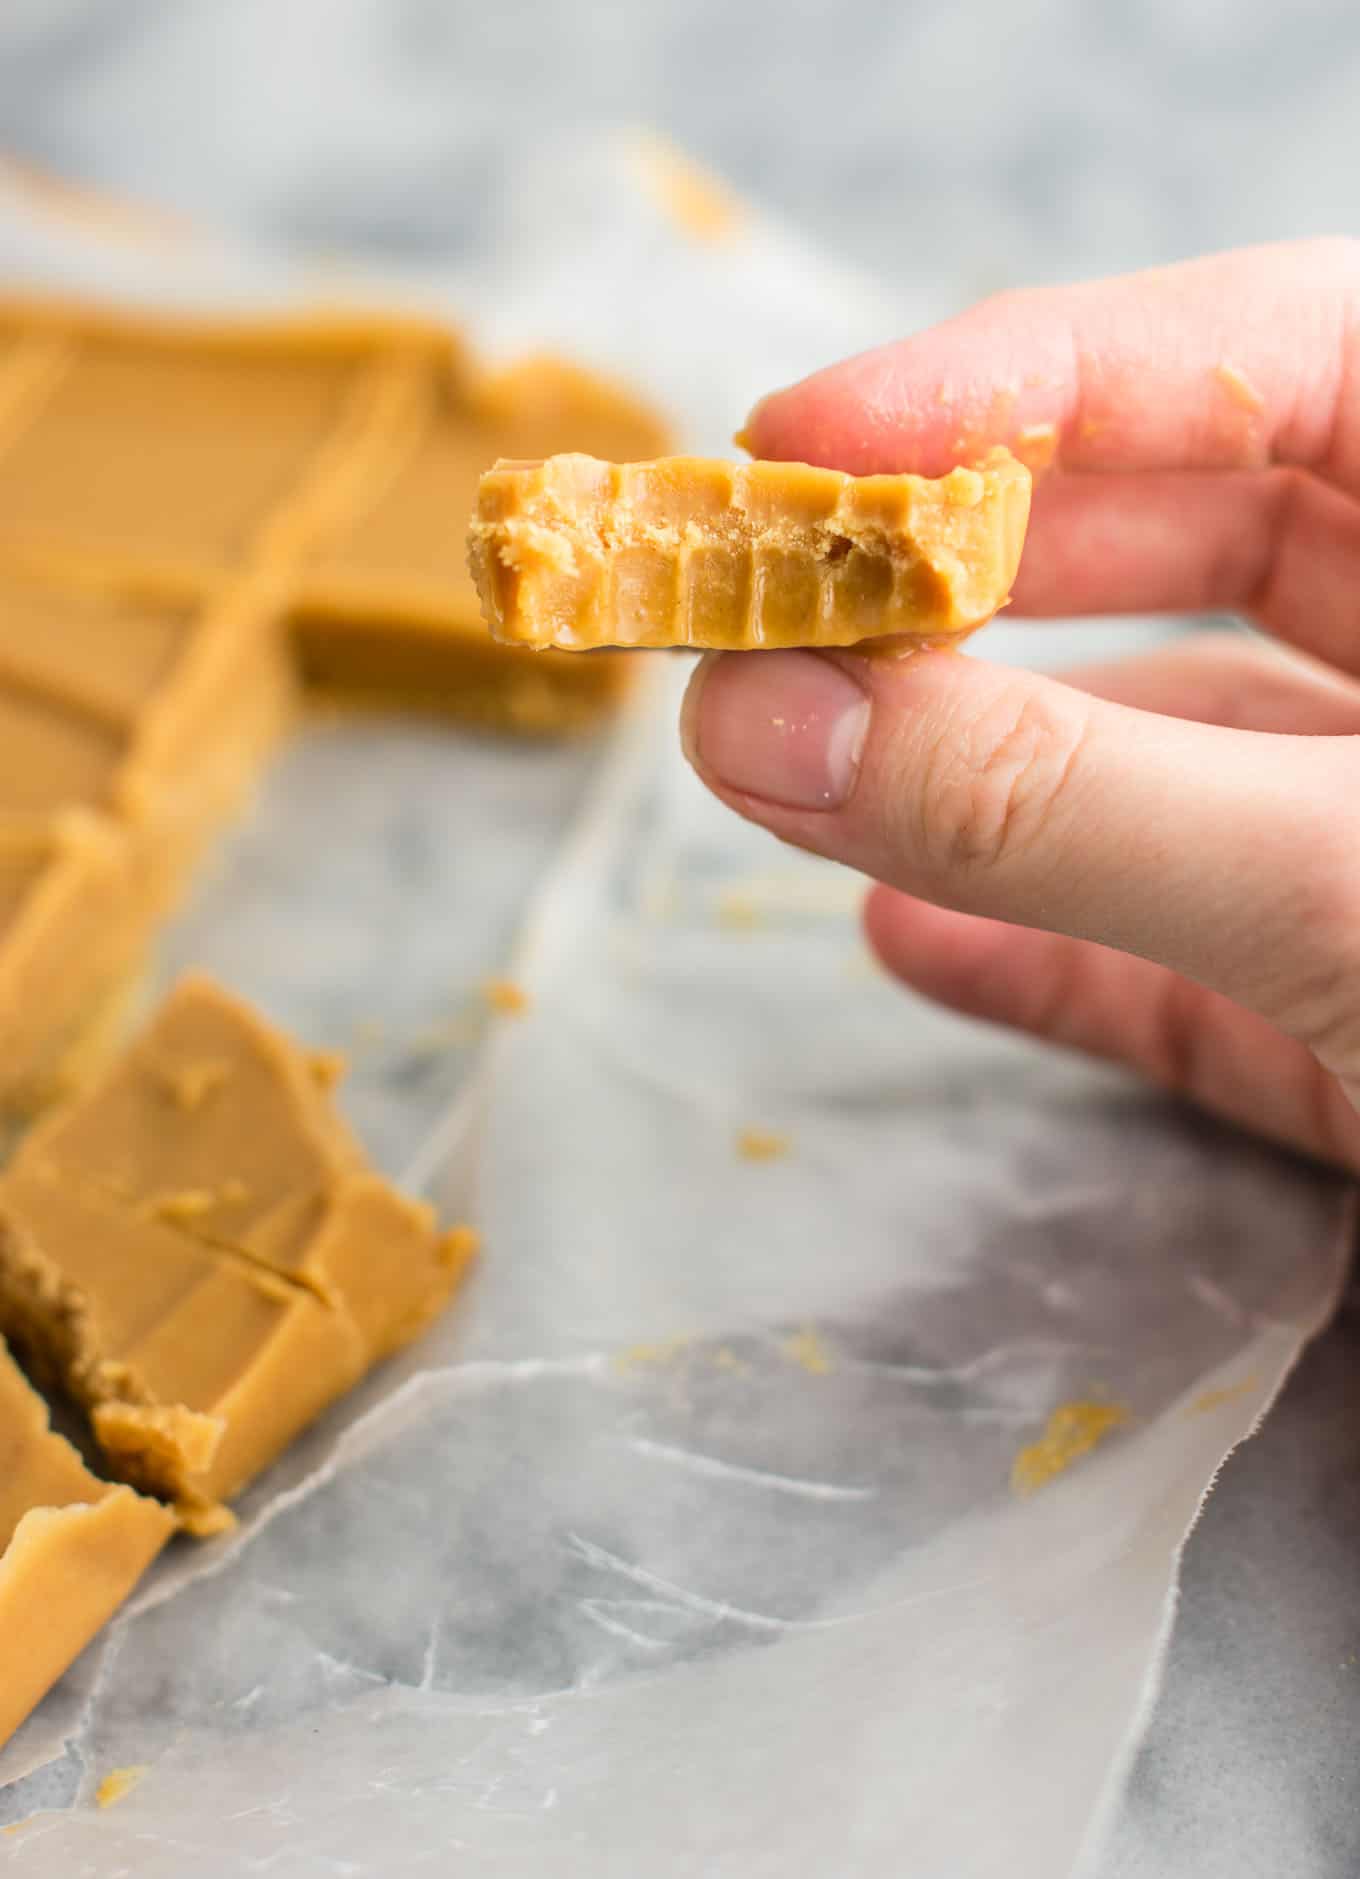 Ultimate healthy peanut butter fudge recipe (vegan, gluten free) An easy dessert you don’t have to feel guilty about! #healthyfudge #healthyveganfudge #vegandessert #peanutbutter #glutenfree #vegan